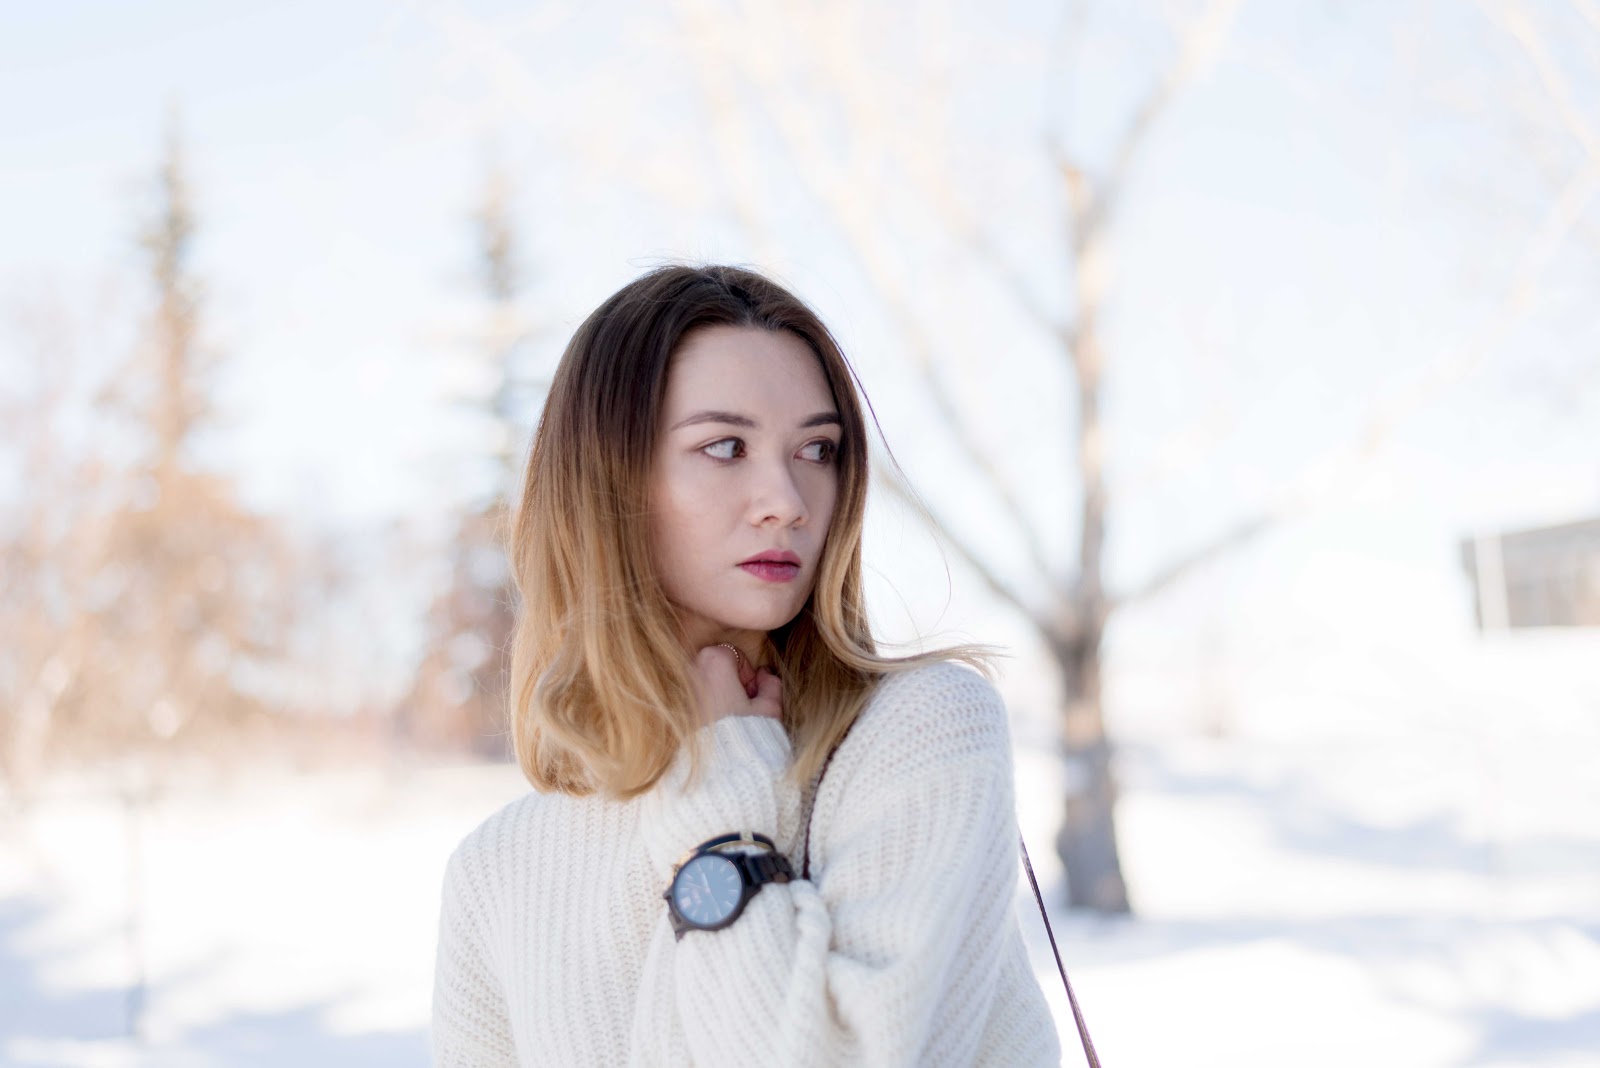 Jord watches, wood watches, uniqlo, minimalistic outfit, winter fashion, culottes